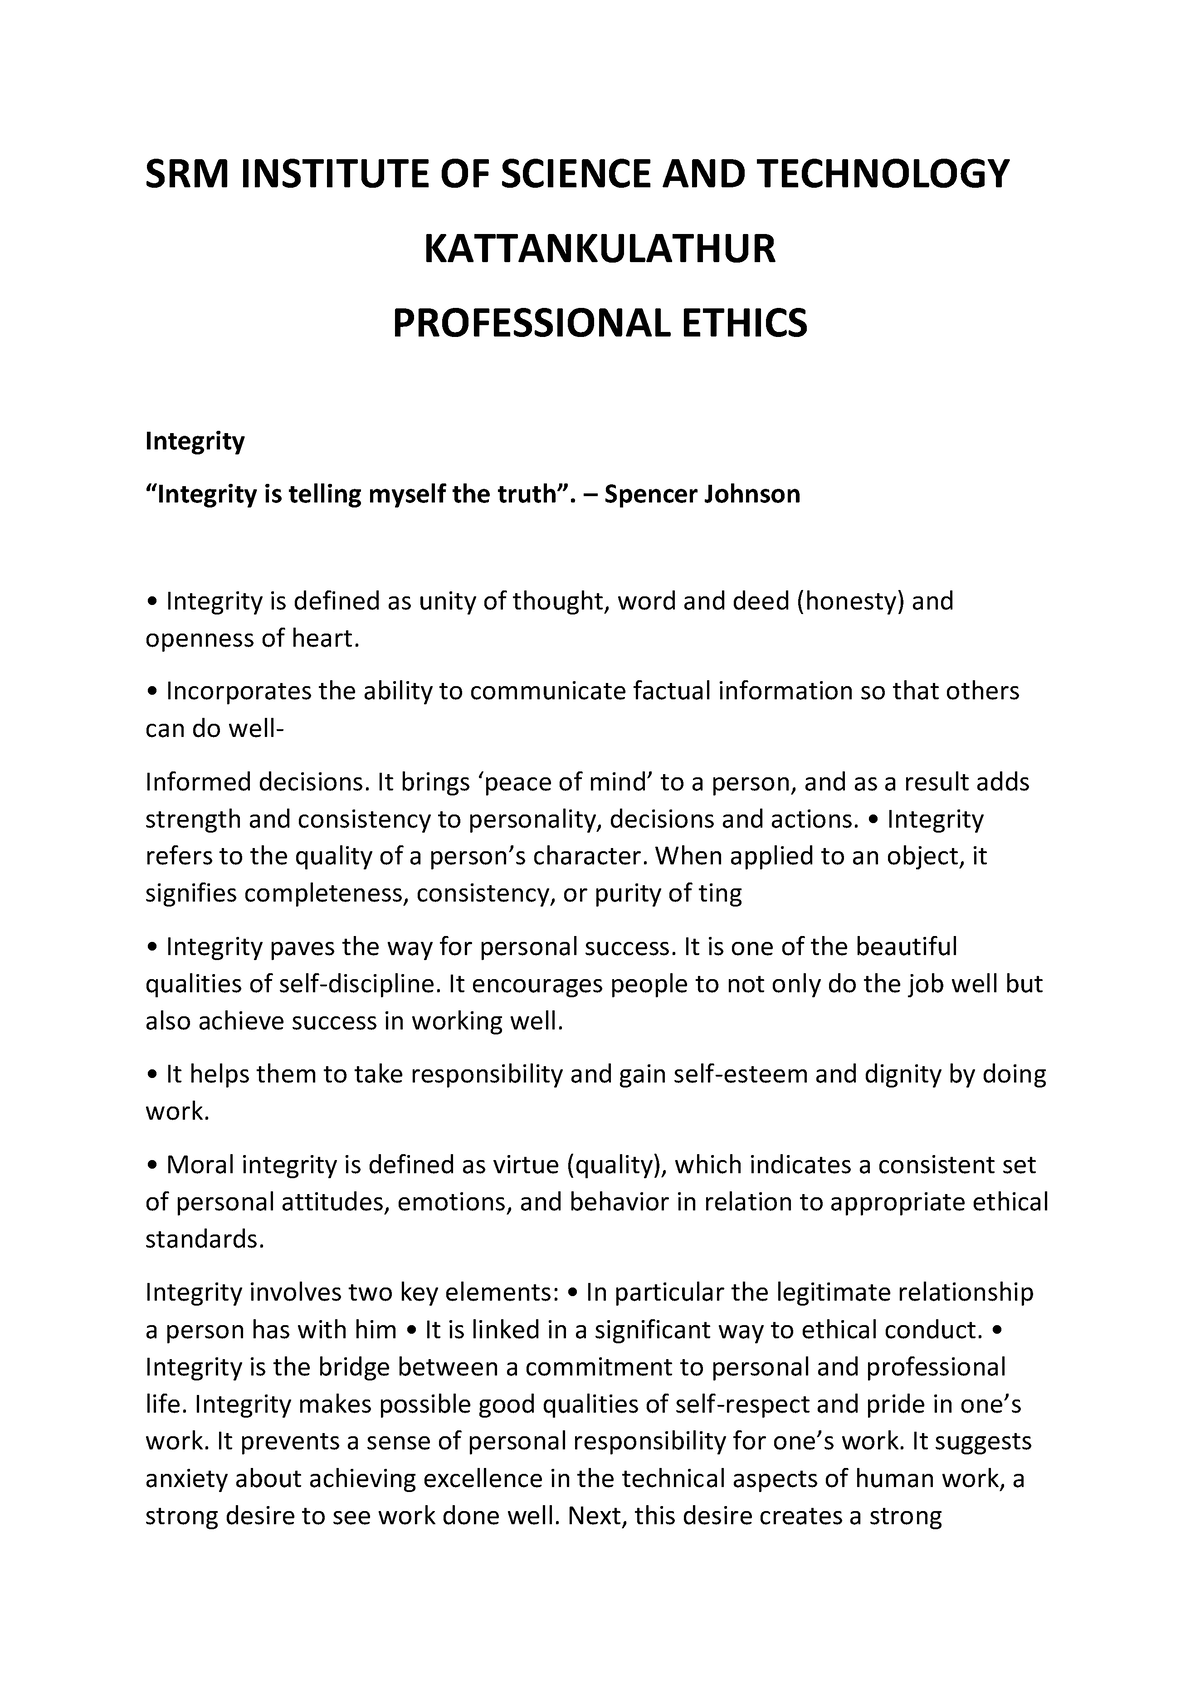 ethics and integrity essay